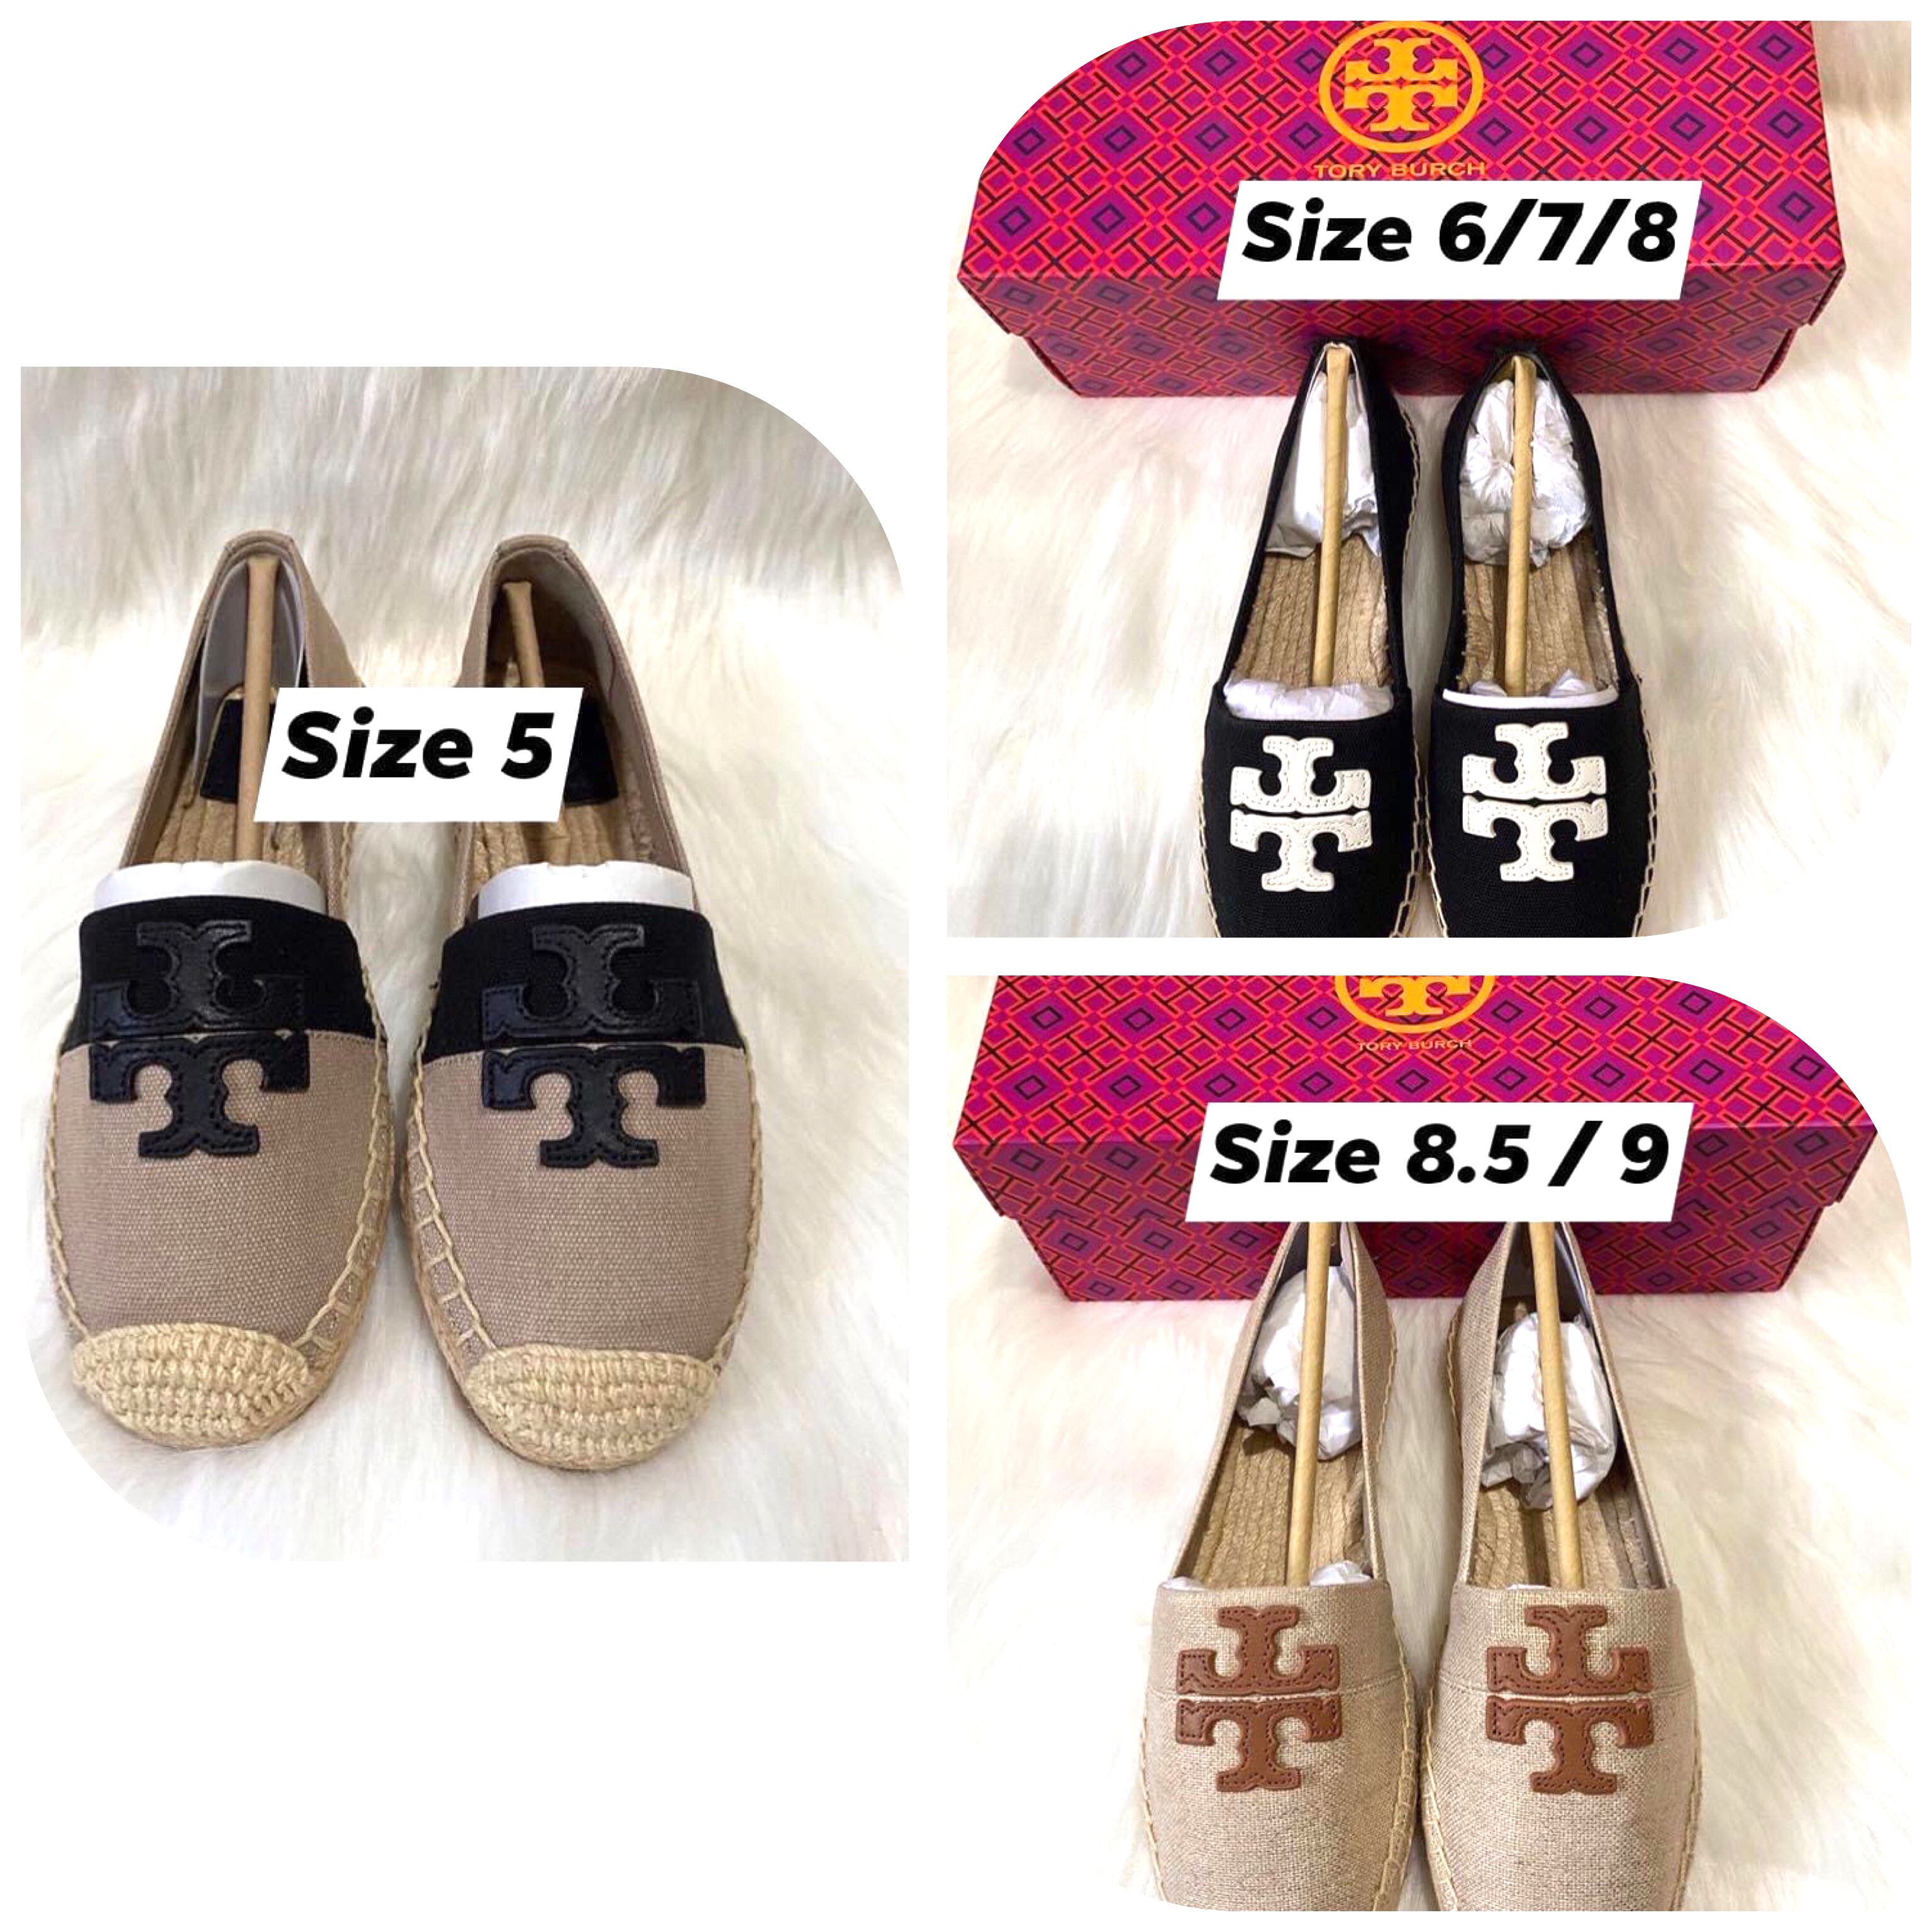 Tory Burch Espadrilles SIZE 5/6/7/8/8.5/9 ON HAND FROM USA, Women's Fashion, Footwear, Flats & Sandals Carousell